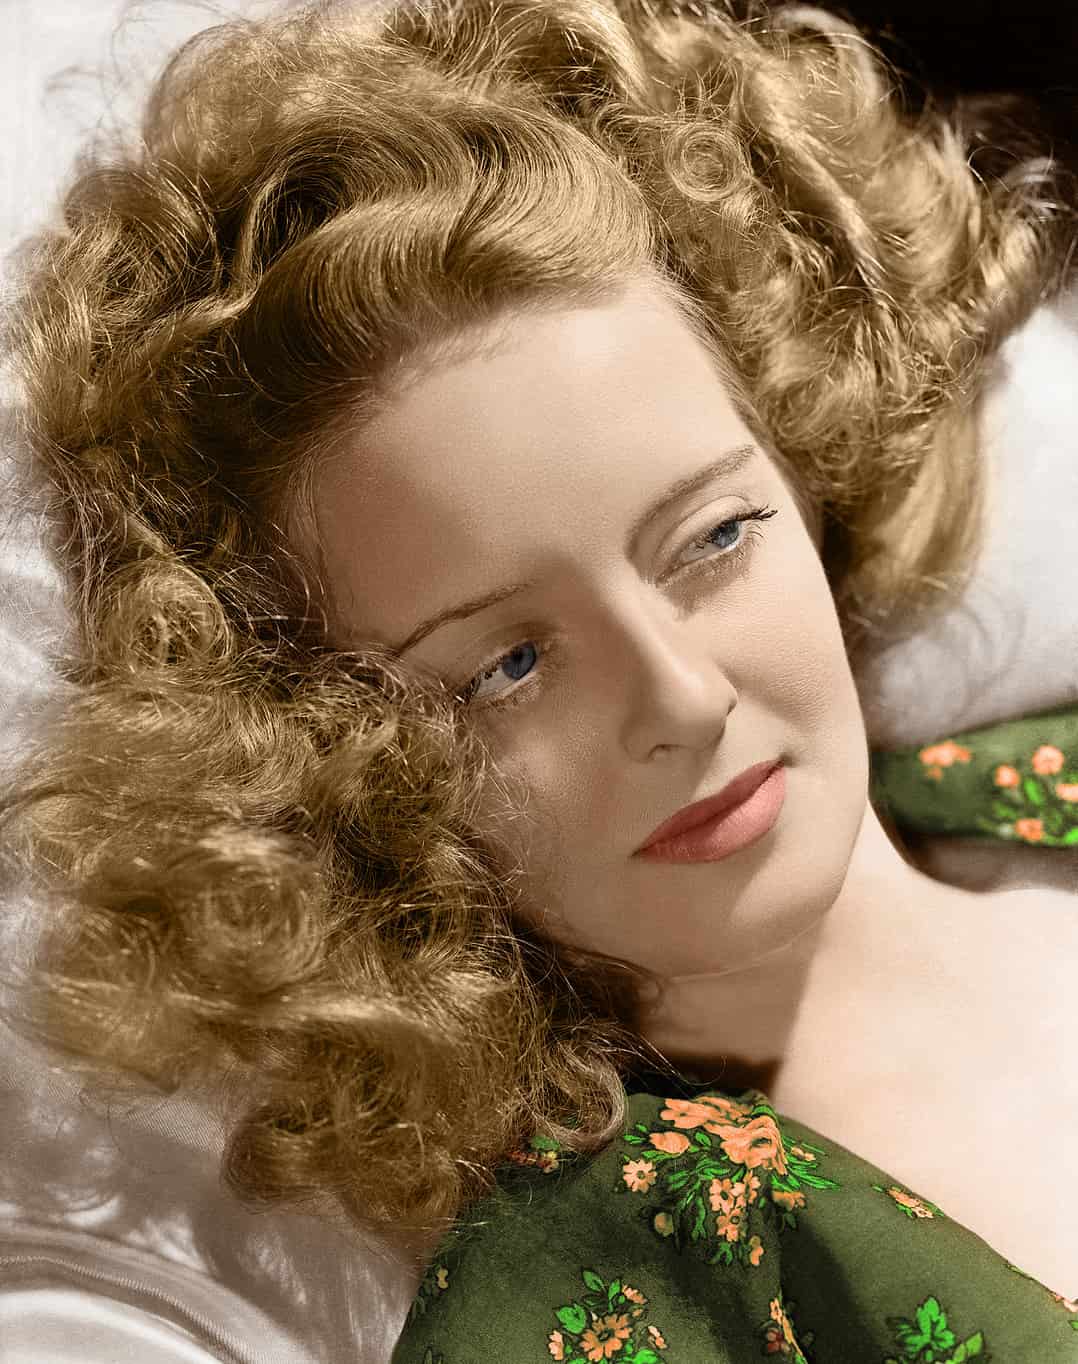 bette-davis-height-weight-age-bra-size-affairs-body-stats-bollywoodfox-2